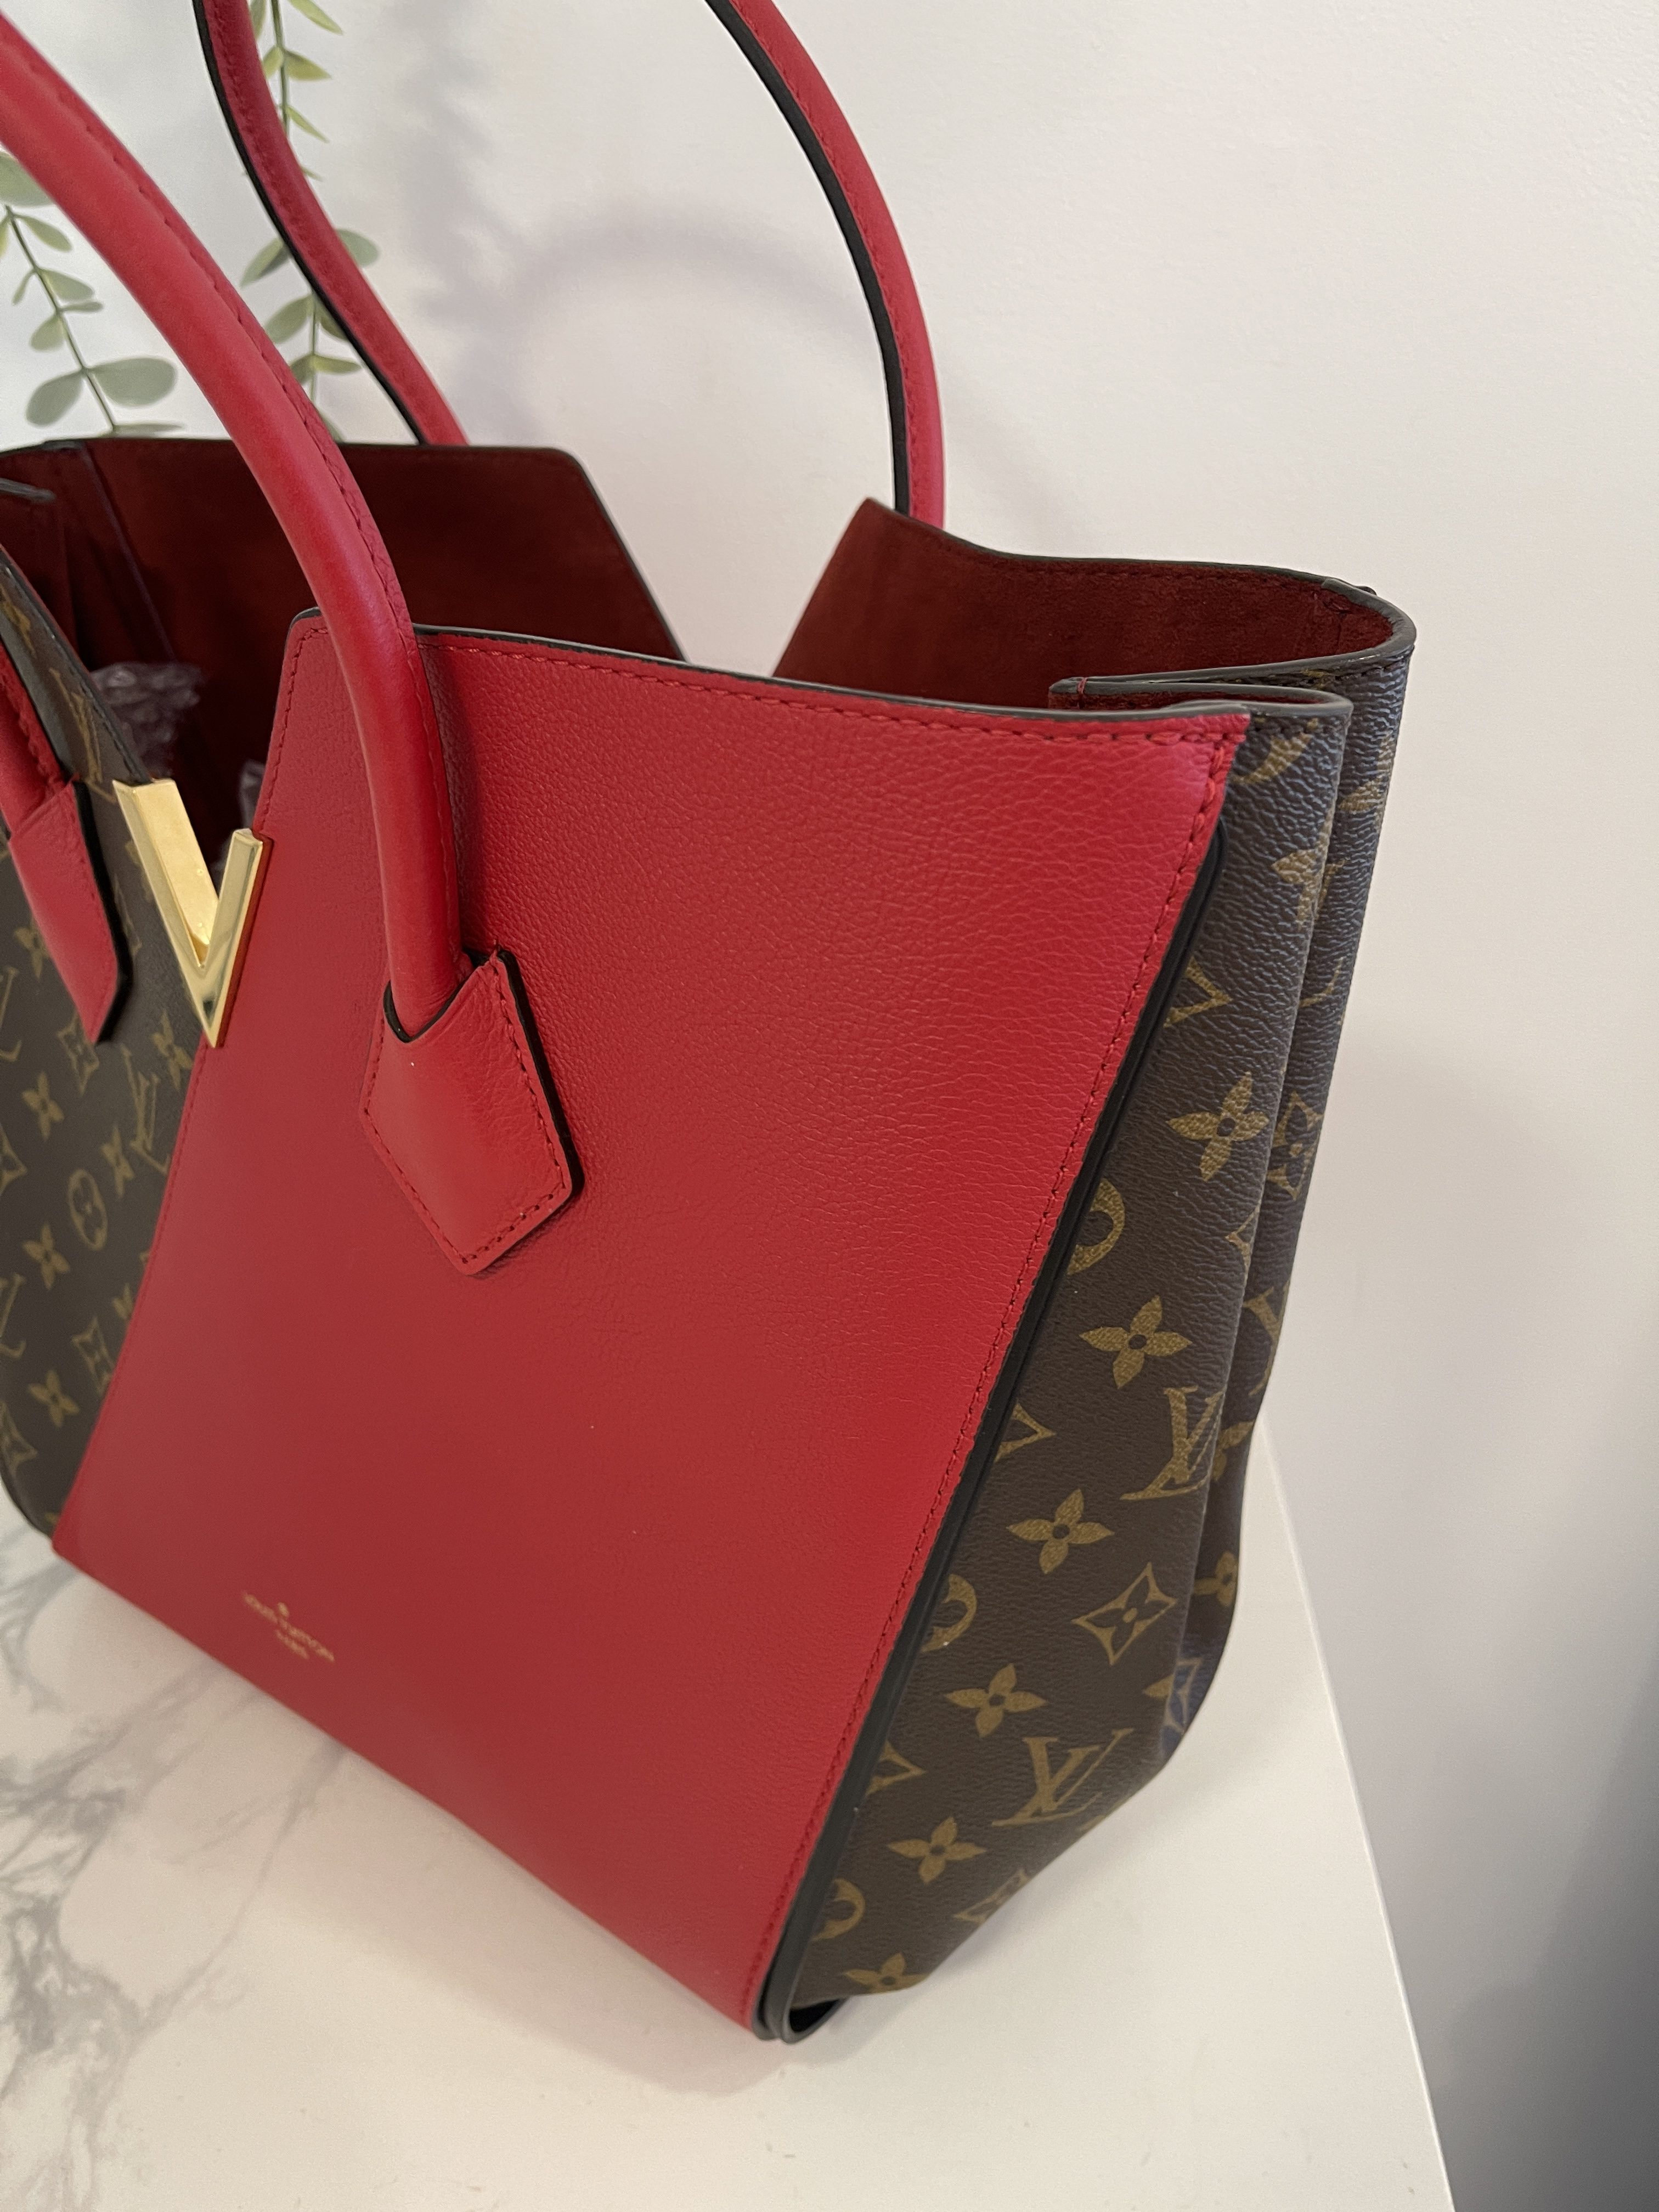 Louis Vuitton Kimono Tote Bag – Dina C's Fab and Funky Consignment Boutique